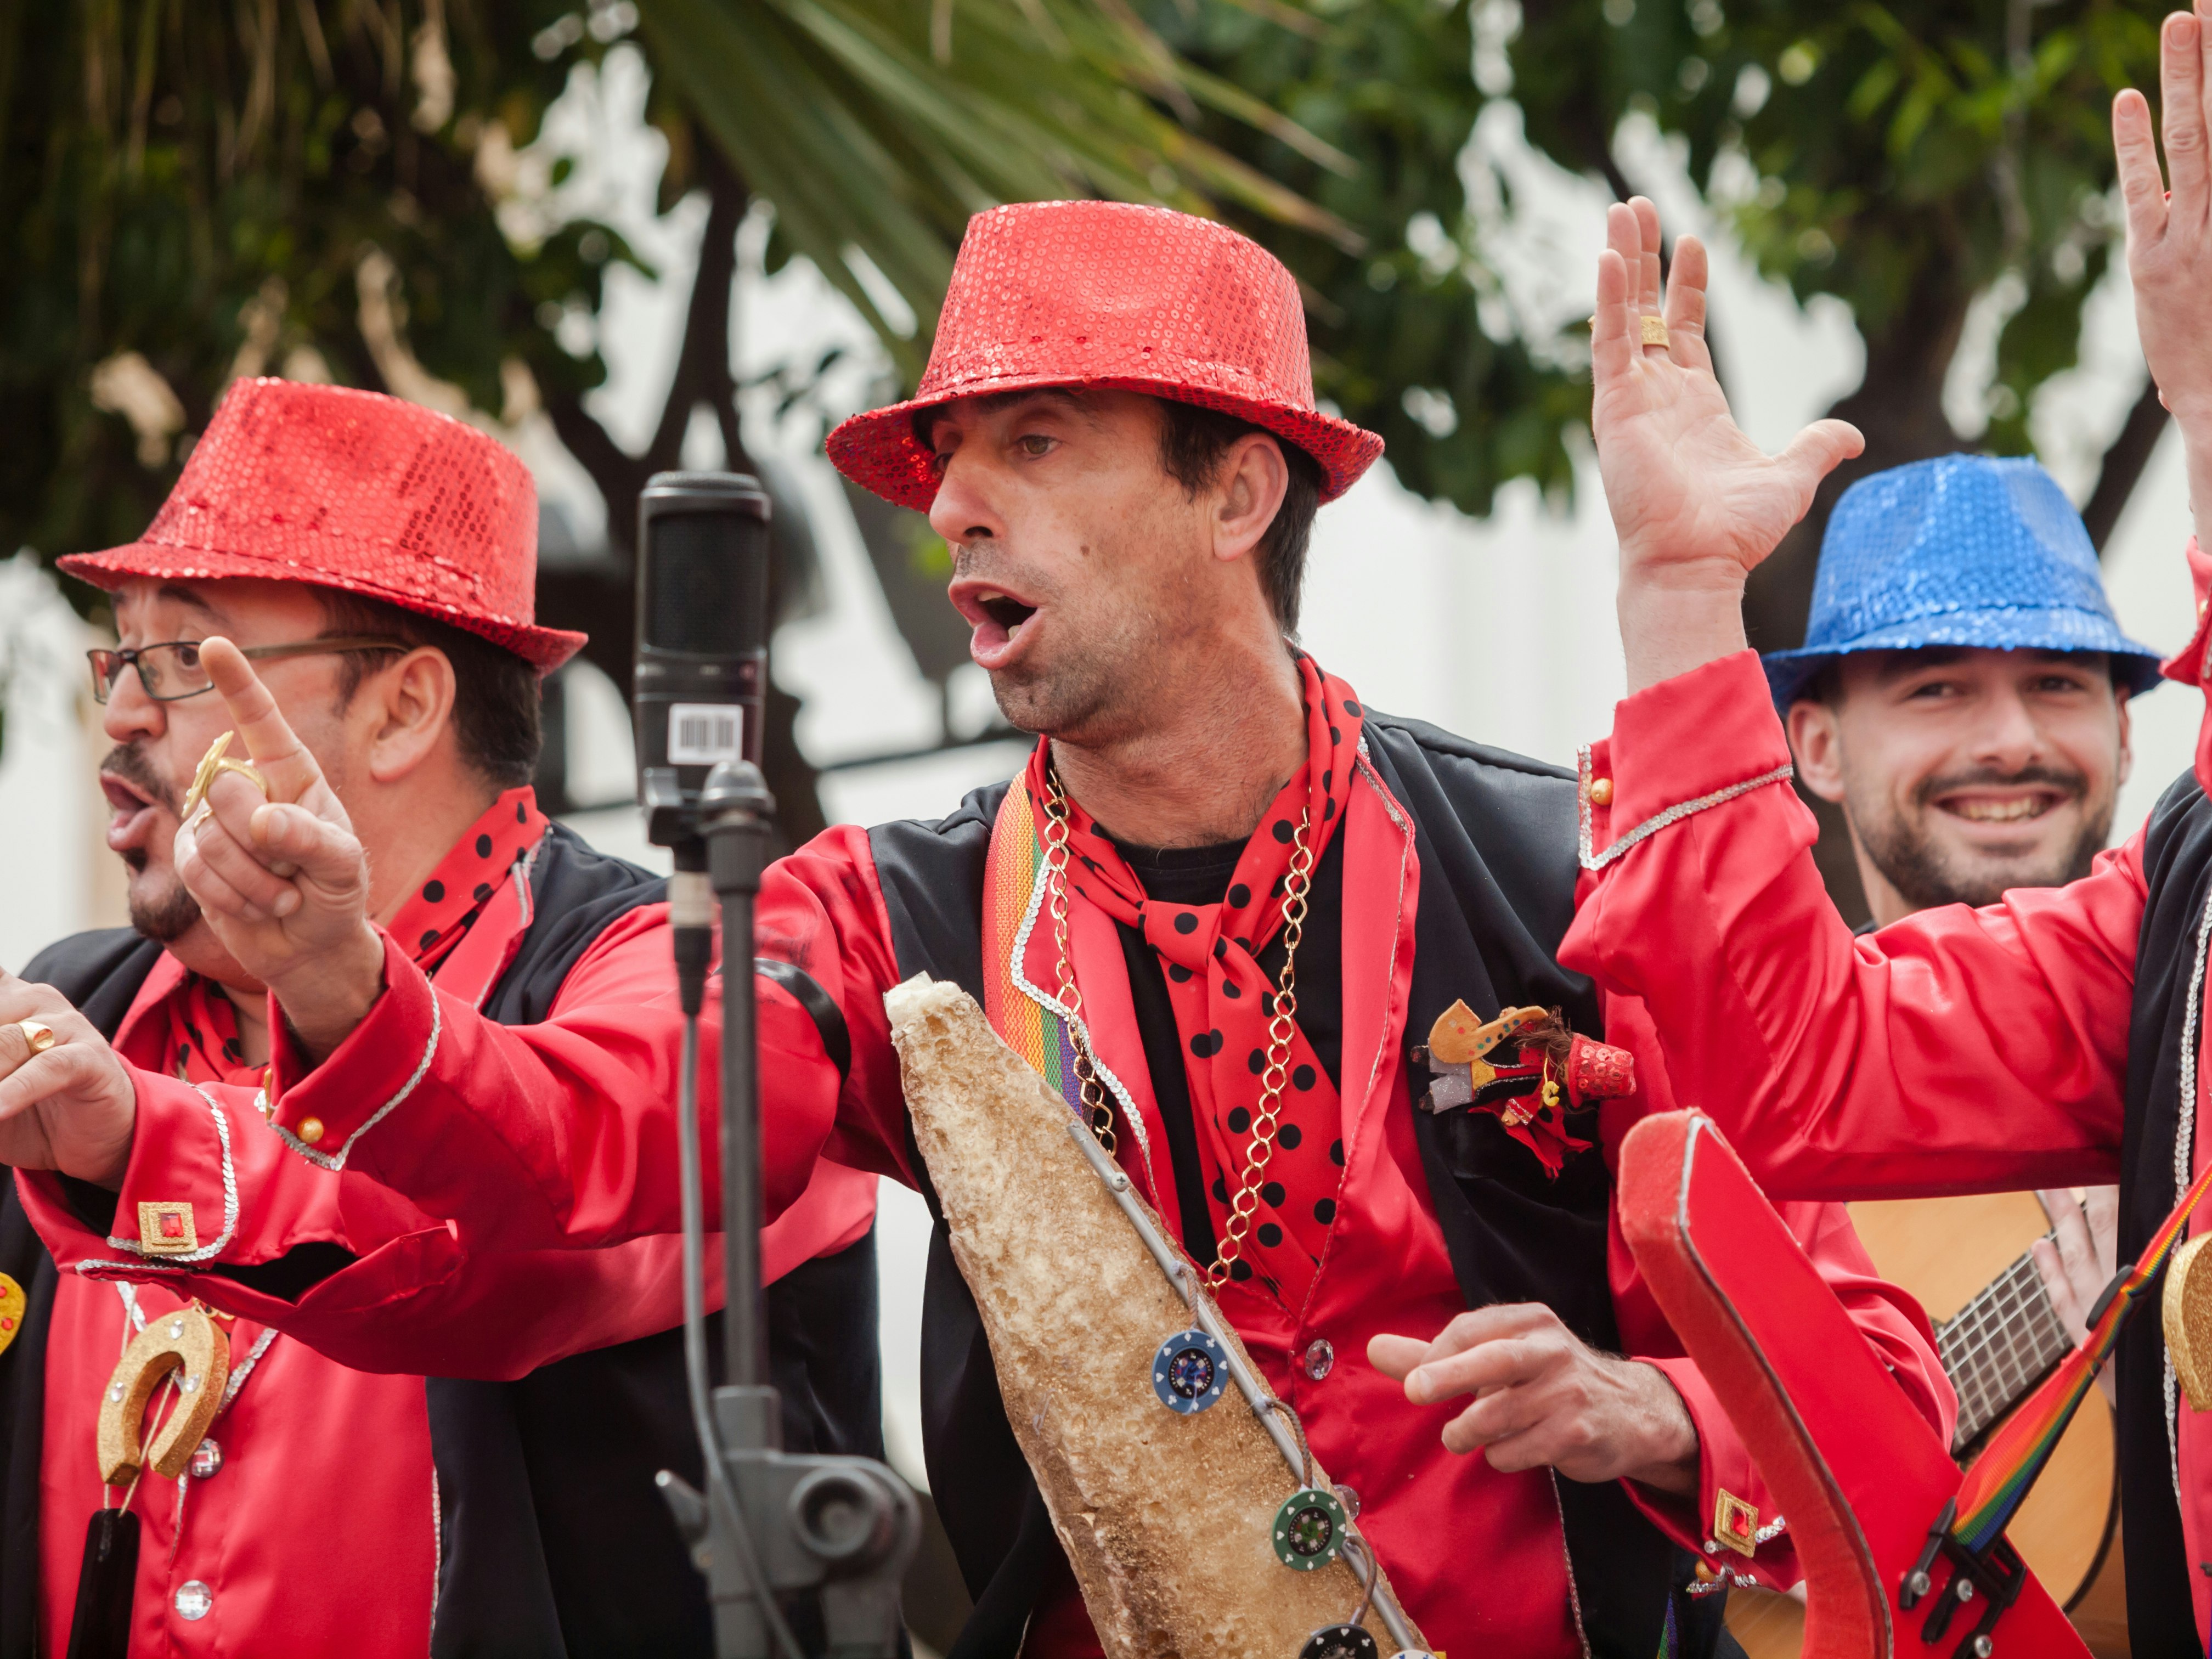 Men in red and black costumes stand around a microphone singing at Cádiz Carnival, Spain.